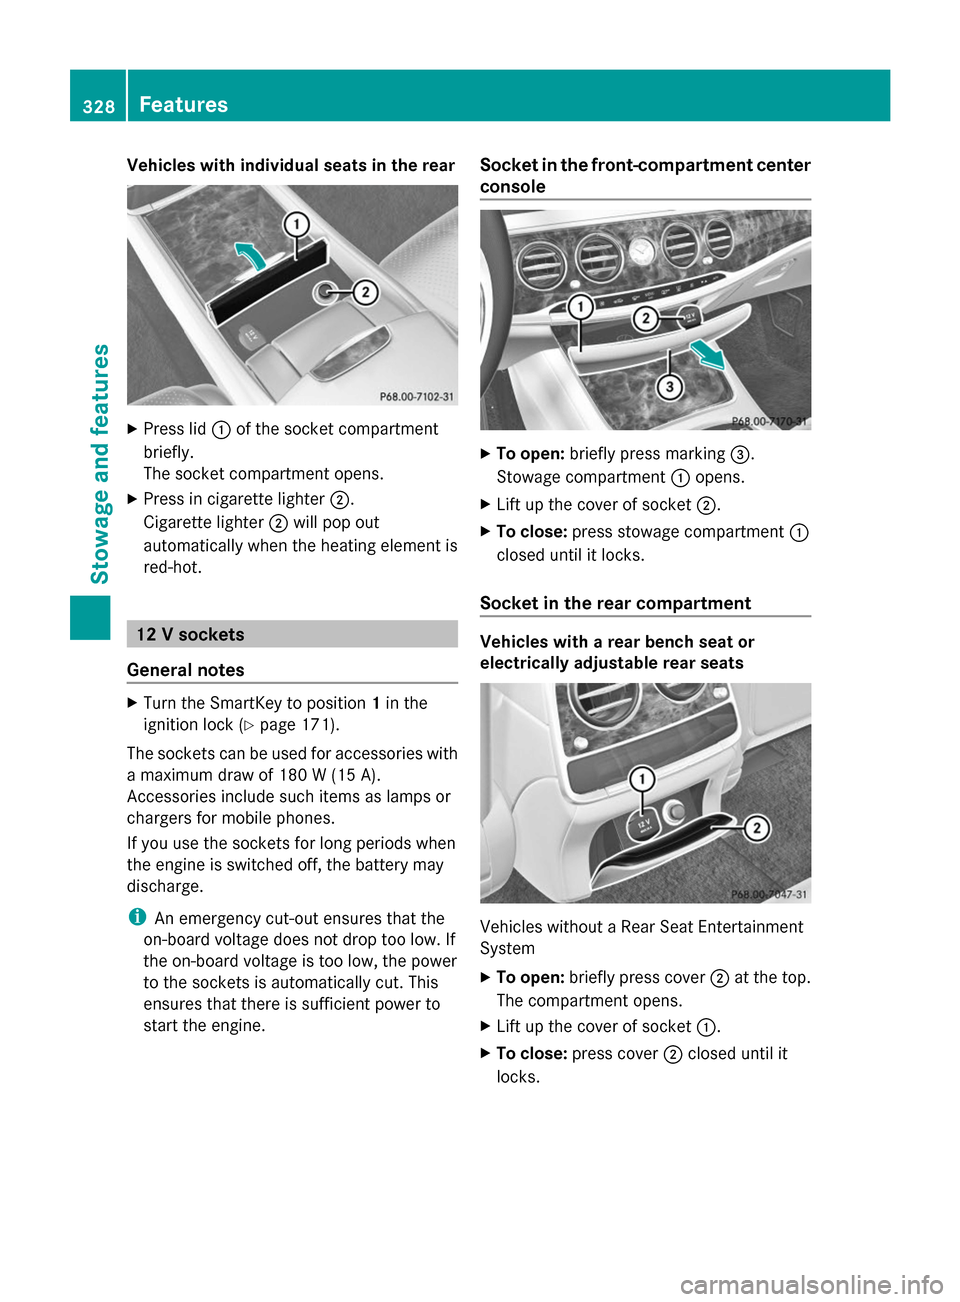 MERCEDES-BENZ S-Class 2014 W222 Manual PDF Vehicles with individual seats in the rear
X
Press lid 0043of the socket compartment
briefly.
The socket compartment opens.
X Press in cigarette lighter 0044.
Cigarette lighter 0044will pop out
automa